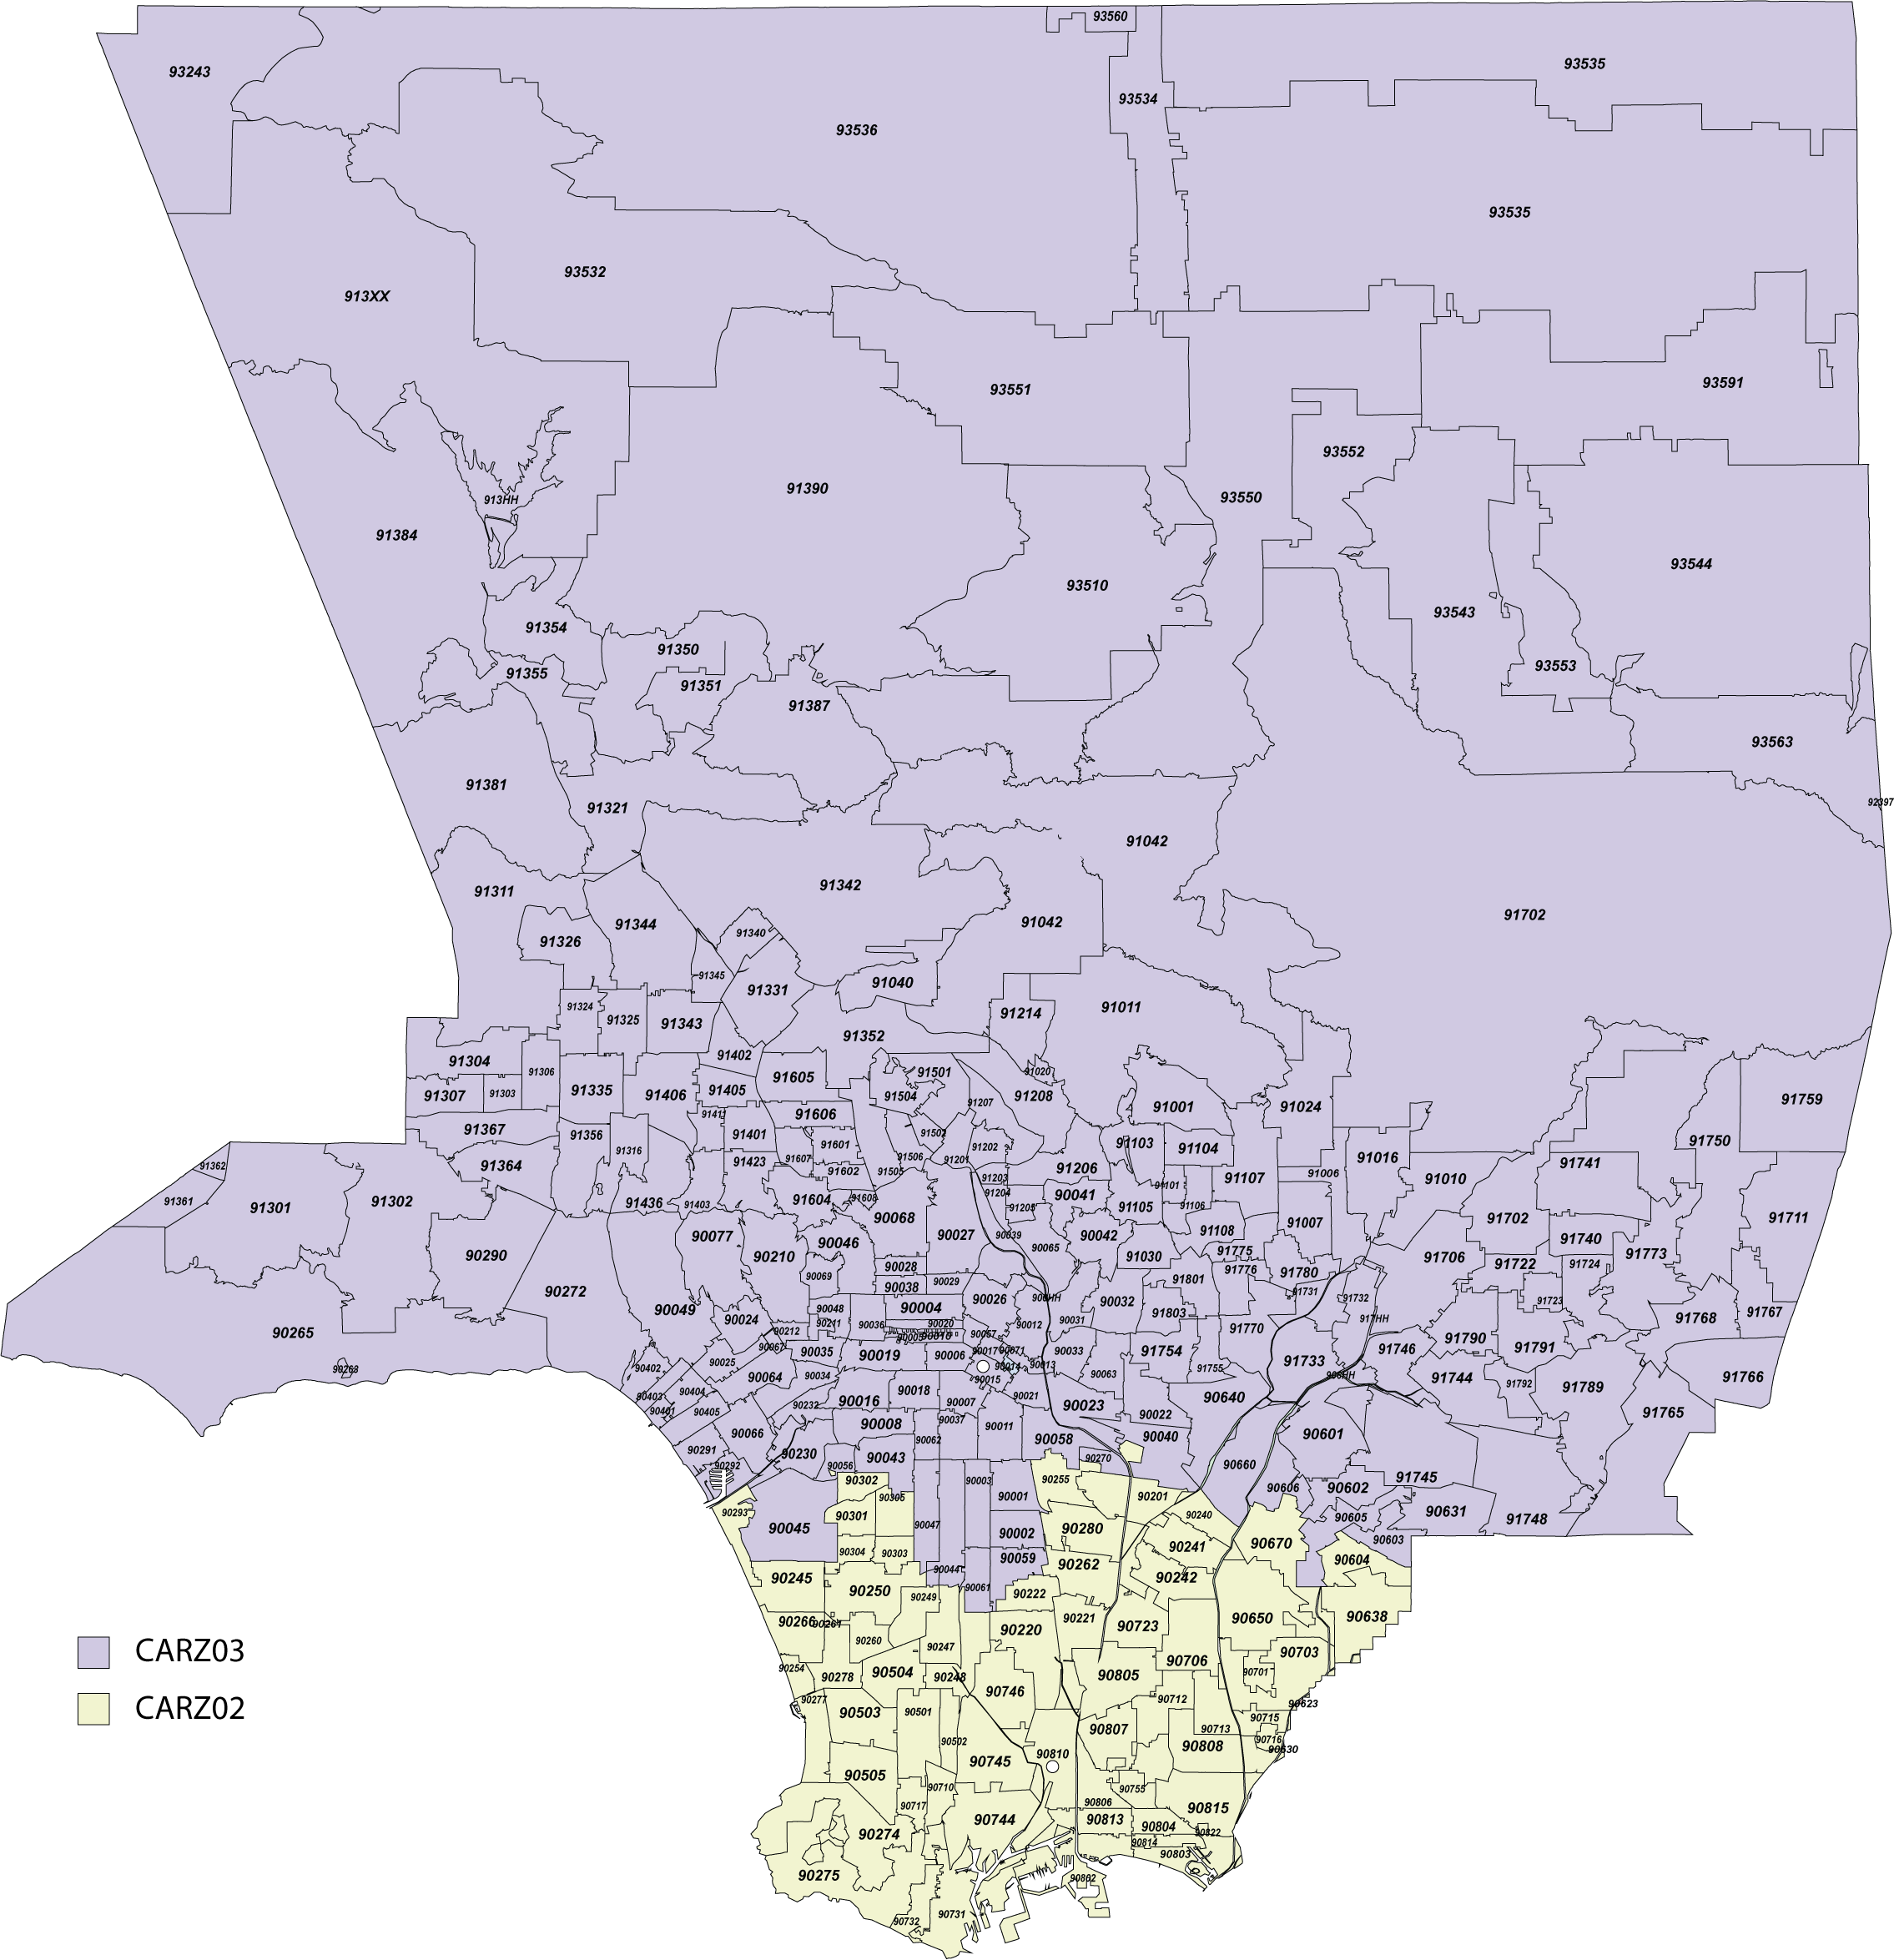 Los Angeles County Recruiting Zone Map